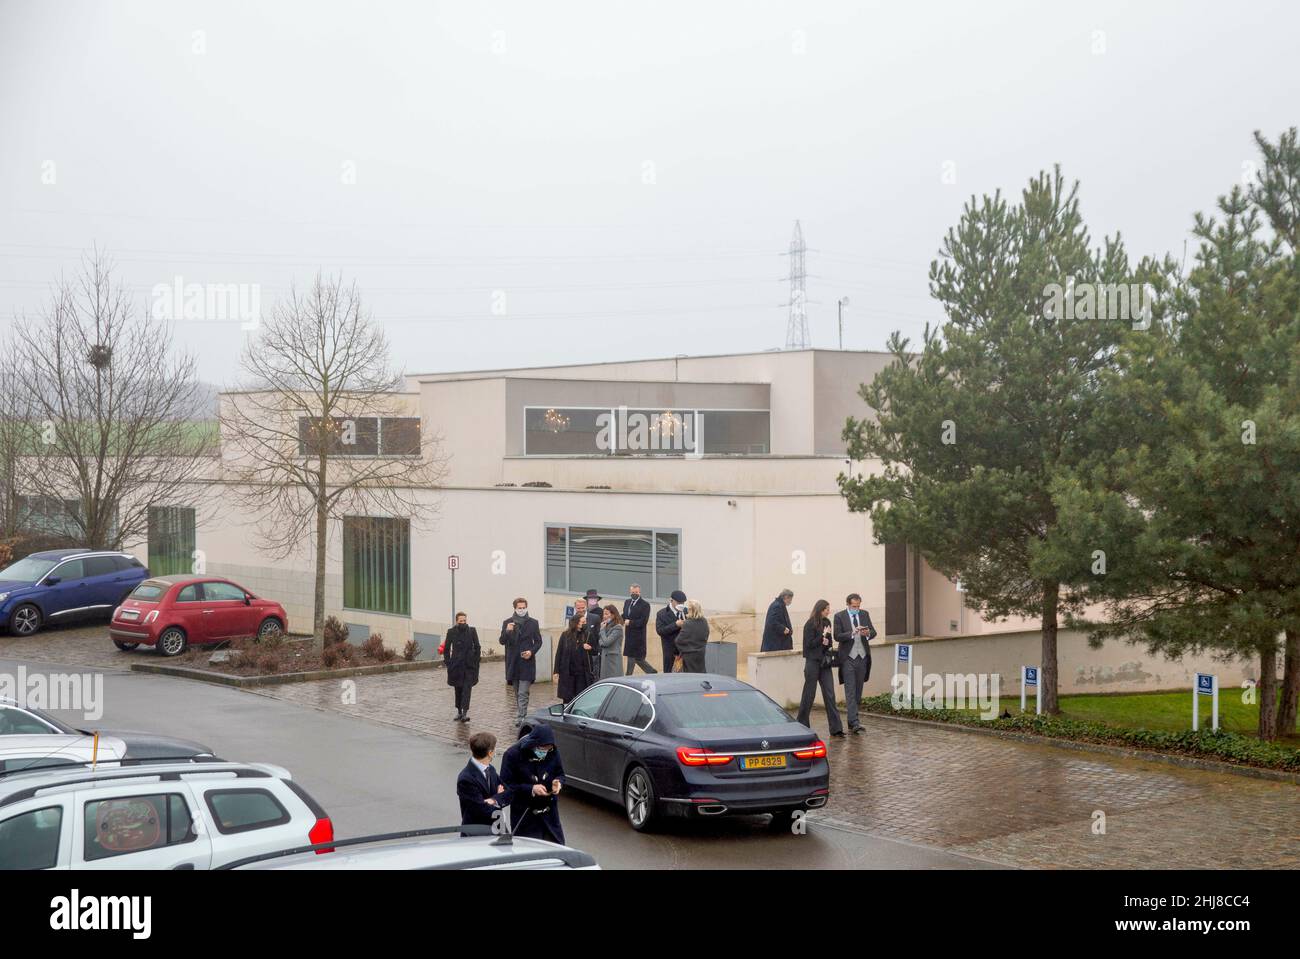 Court Saint Etienne, Belgien. 27th Jan, 2022. Quests leave at Crematorium Champ de Court after the cremation of Jacques Pol Pascal Marie Ghislain Boel (31-03-1929-21-01-2022) in Court-Saint-Etienne, on January 27, 2022, he was the legal father of Delphine Boel for 50 years, now Delphine Michele Anne Marie Ghislaine of Saxen-Coburg, Princess of Belgium, daughter of King Albert II of Belgium and baroness Sybille de Selys Longchamps Credit: Albert Nieboer/Netherlands OUT/Point de Vue OUT/dpa/Alamy Live News Stock Photo